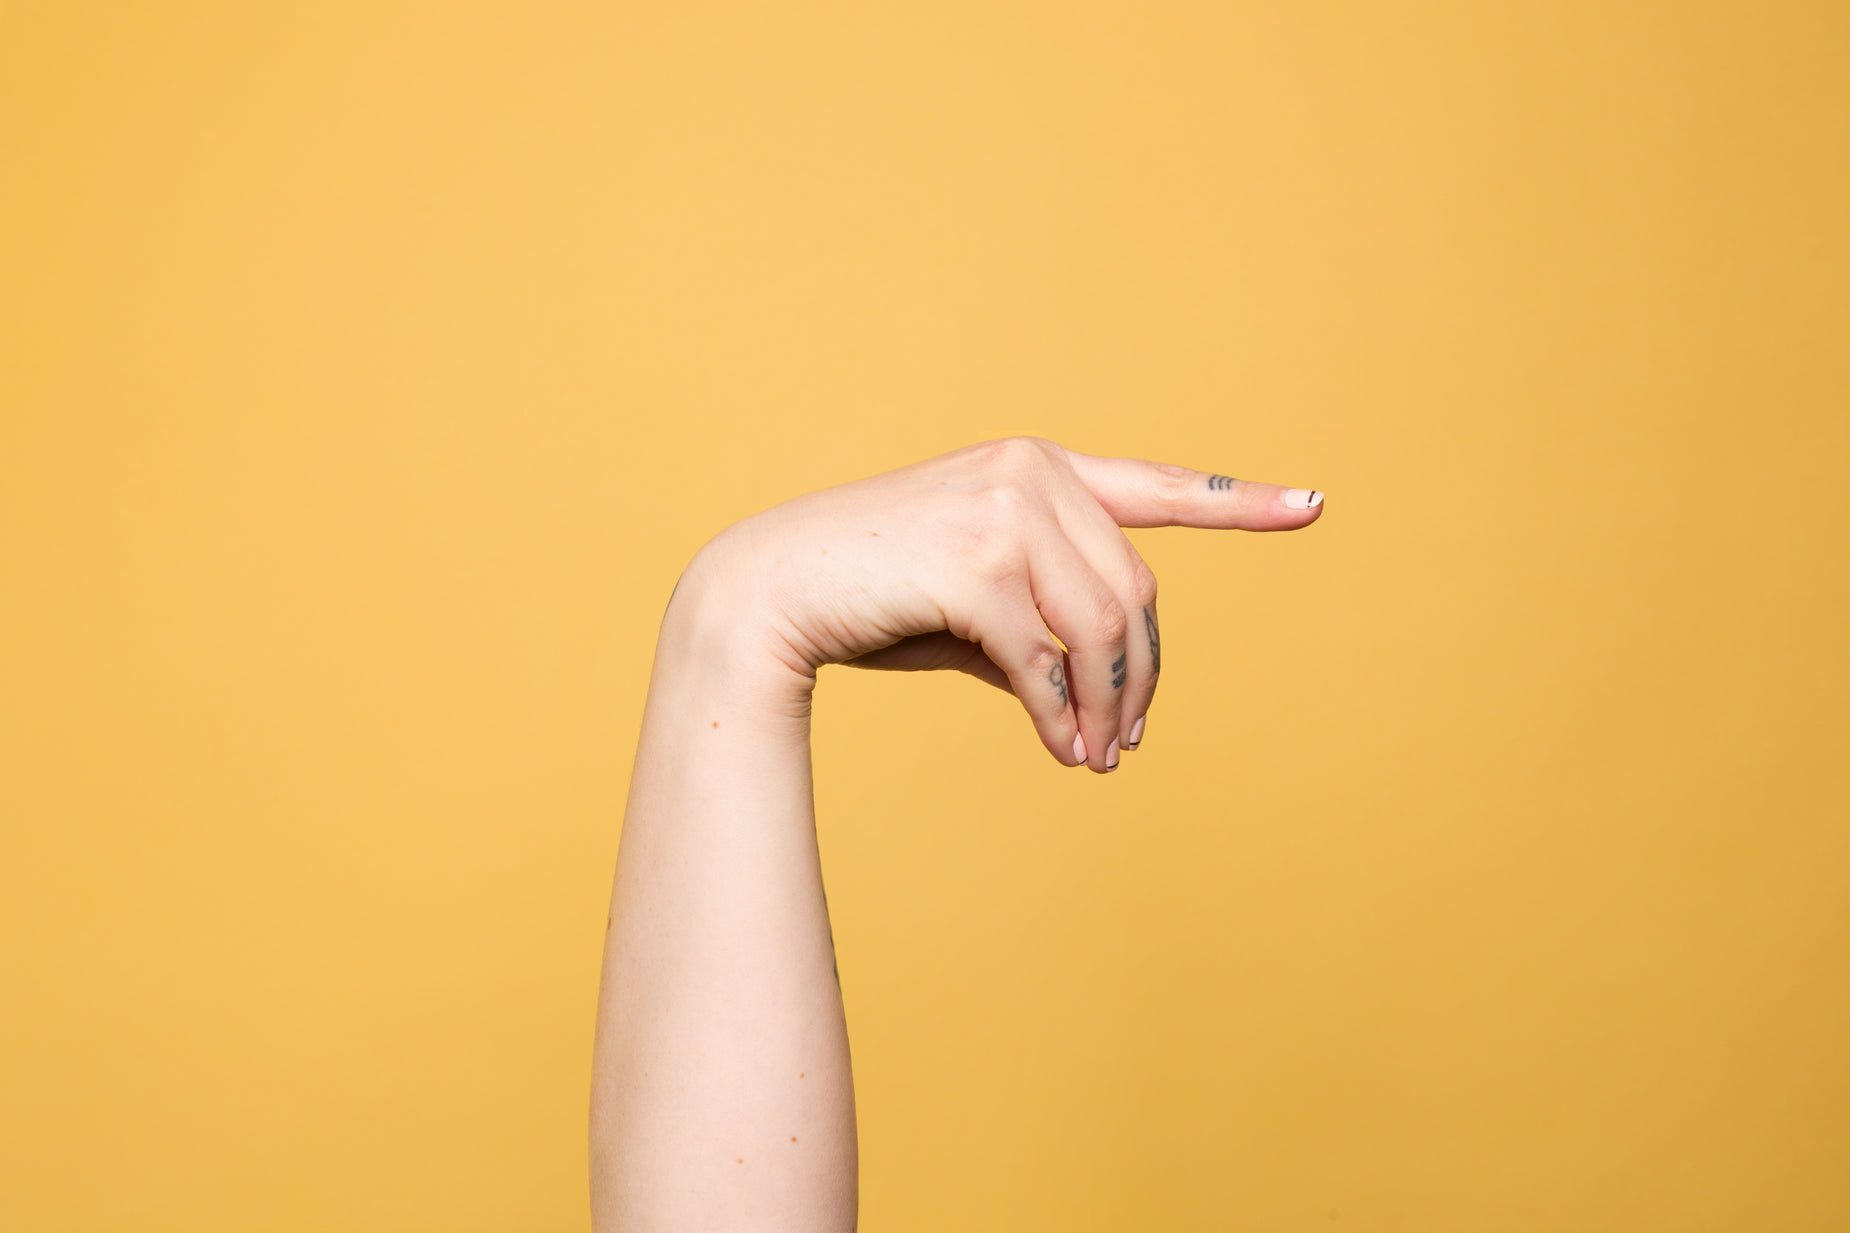 a woman's arm reaching out towards soing with one hand and her other thumb extended forward, against an orange background